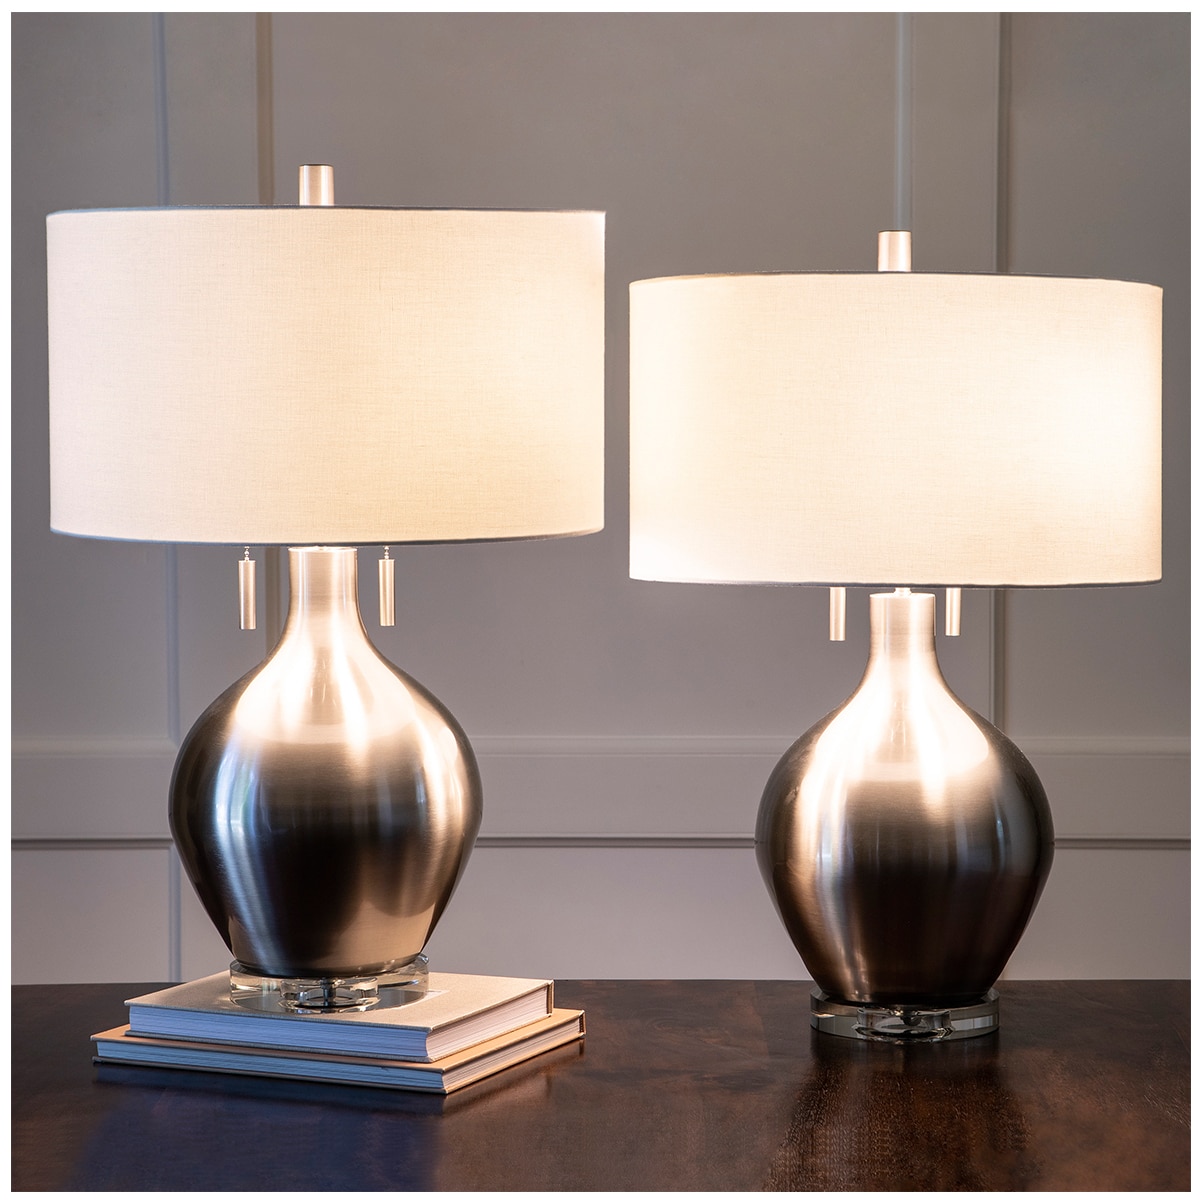 J Hunt Home Table Lamps 2pc | Costco 